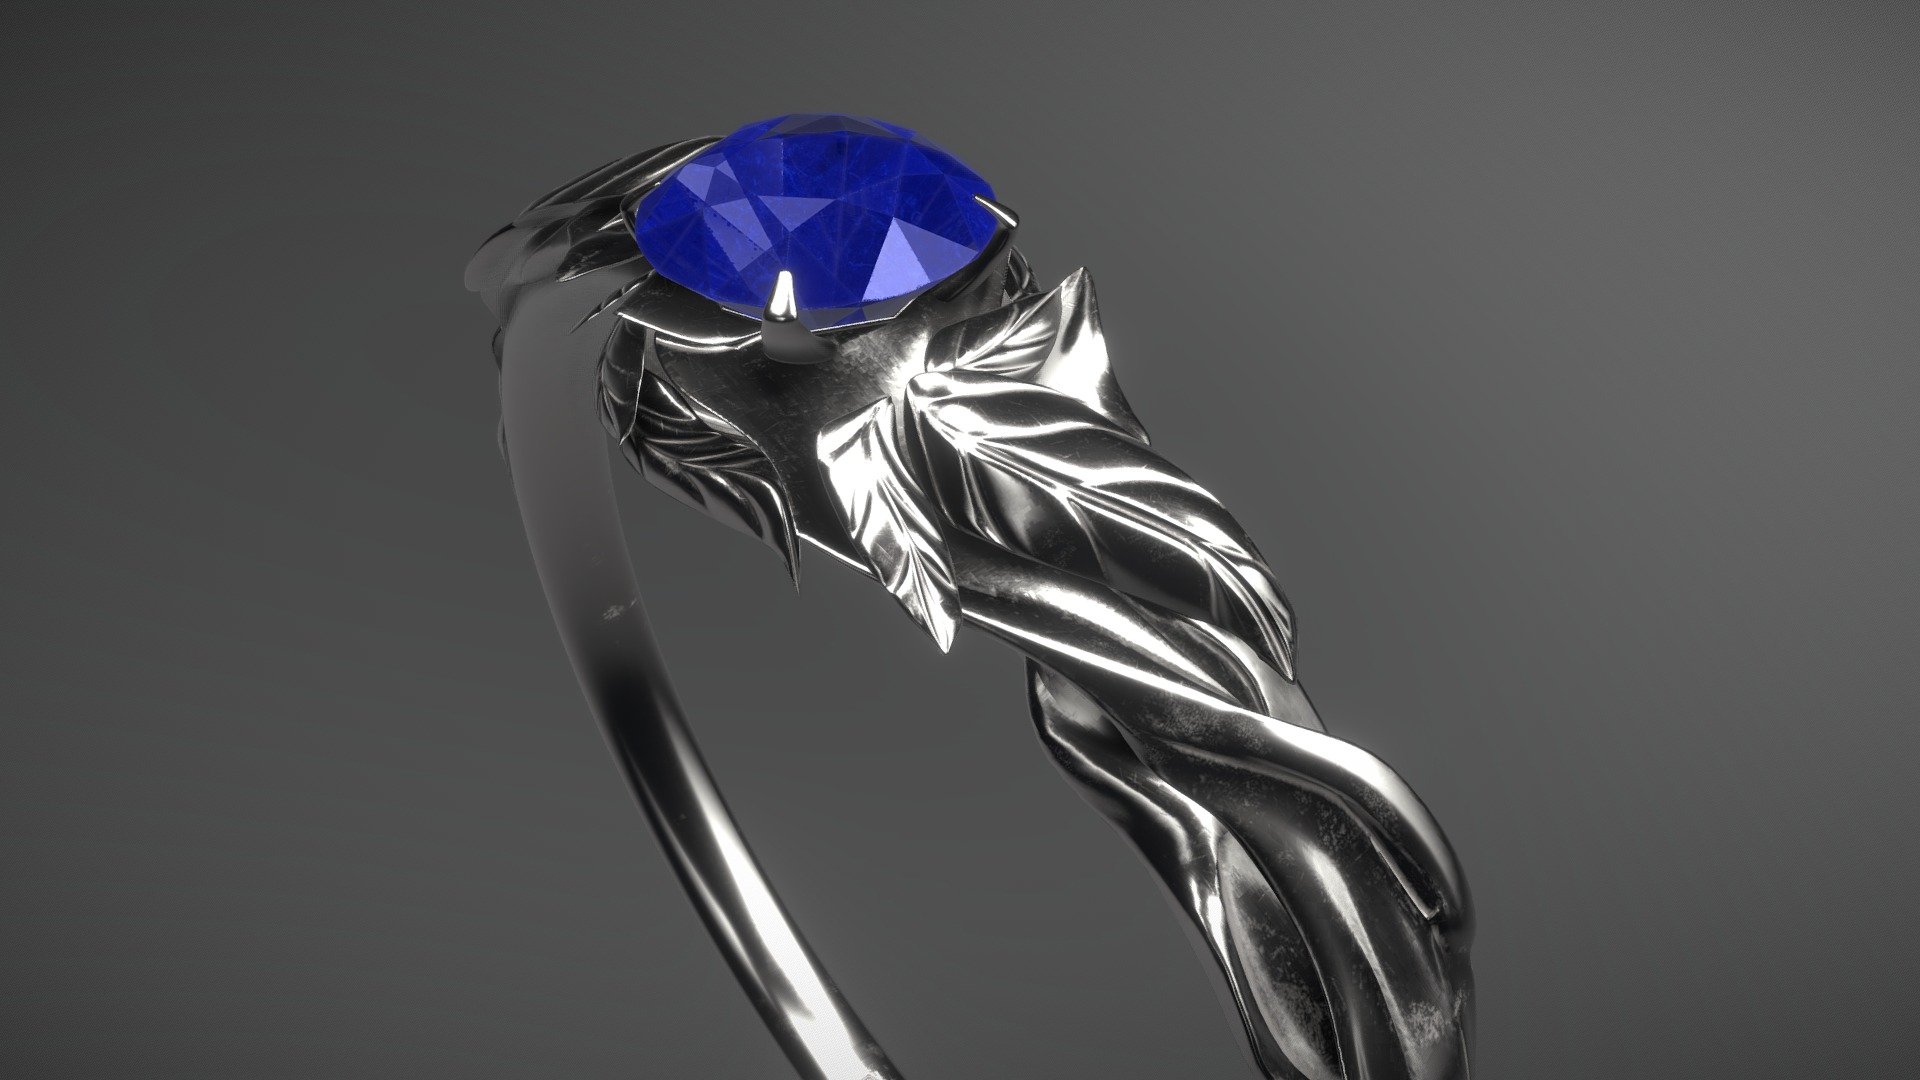 Ring made of white gold with saphire and leaf forms.
The model was created in Blender and textured in Substance Painter 3d model